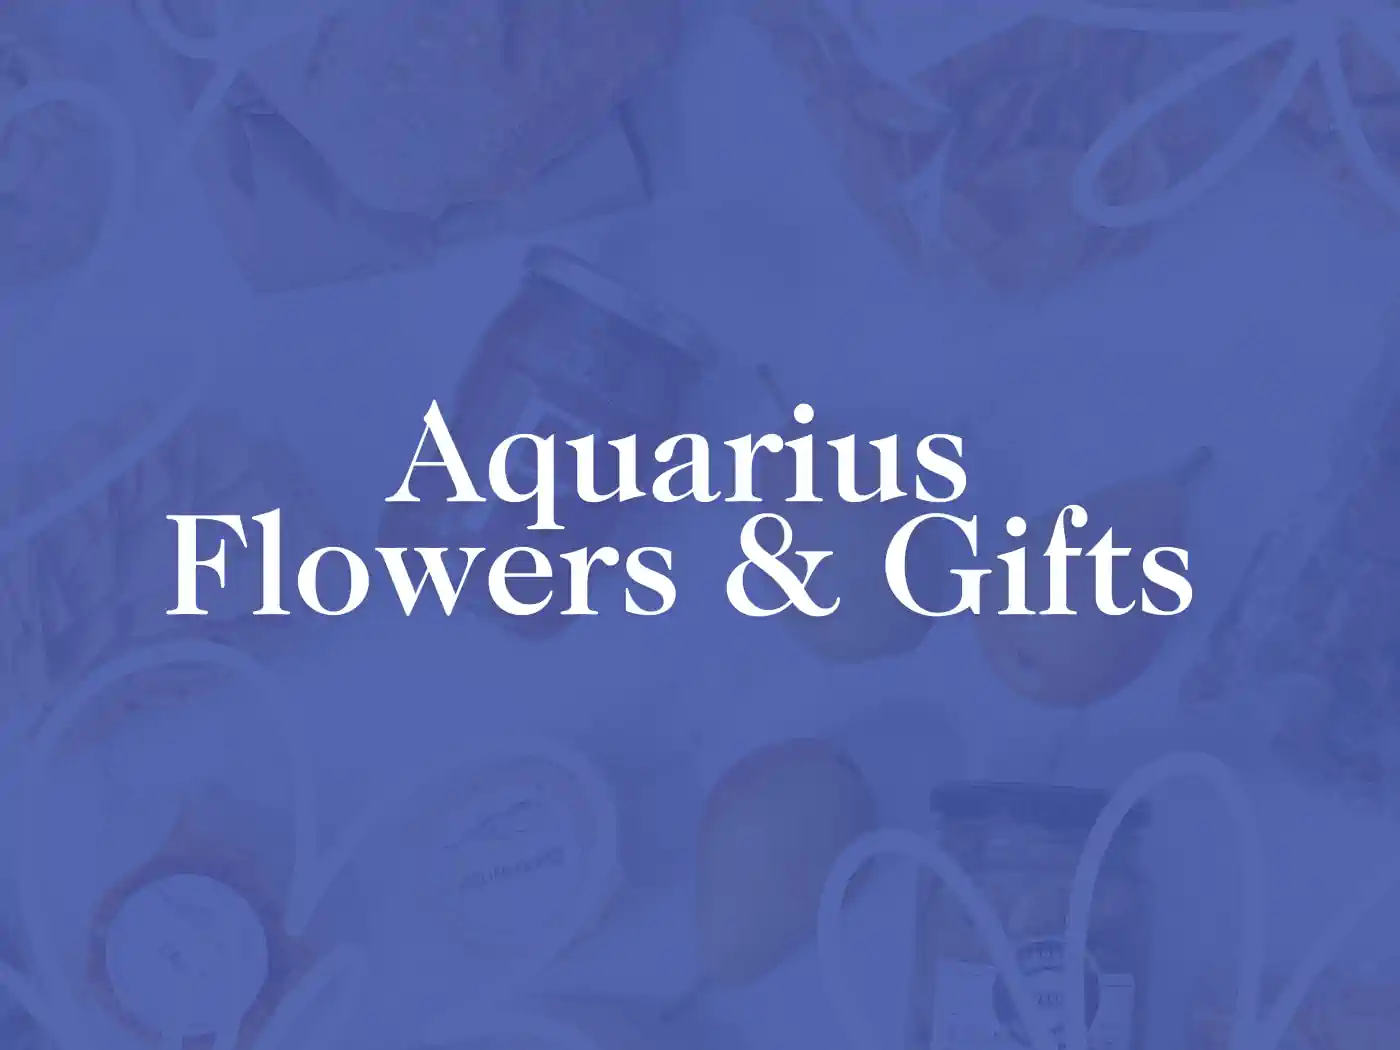 Aquarius Flowers & Gifts logo on a blue background. Fabulous Flowers and Gifts. Aquarius Flowers & Gifts Collection.